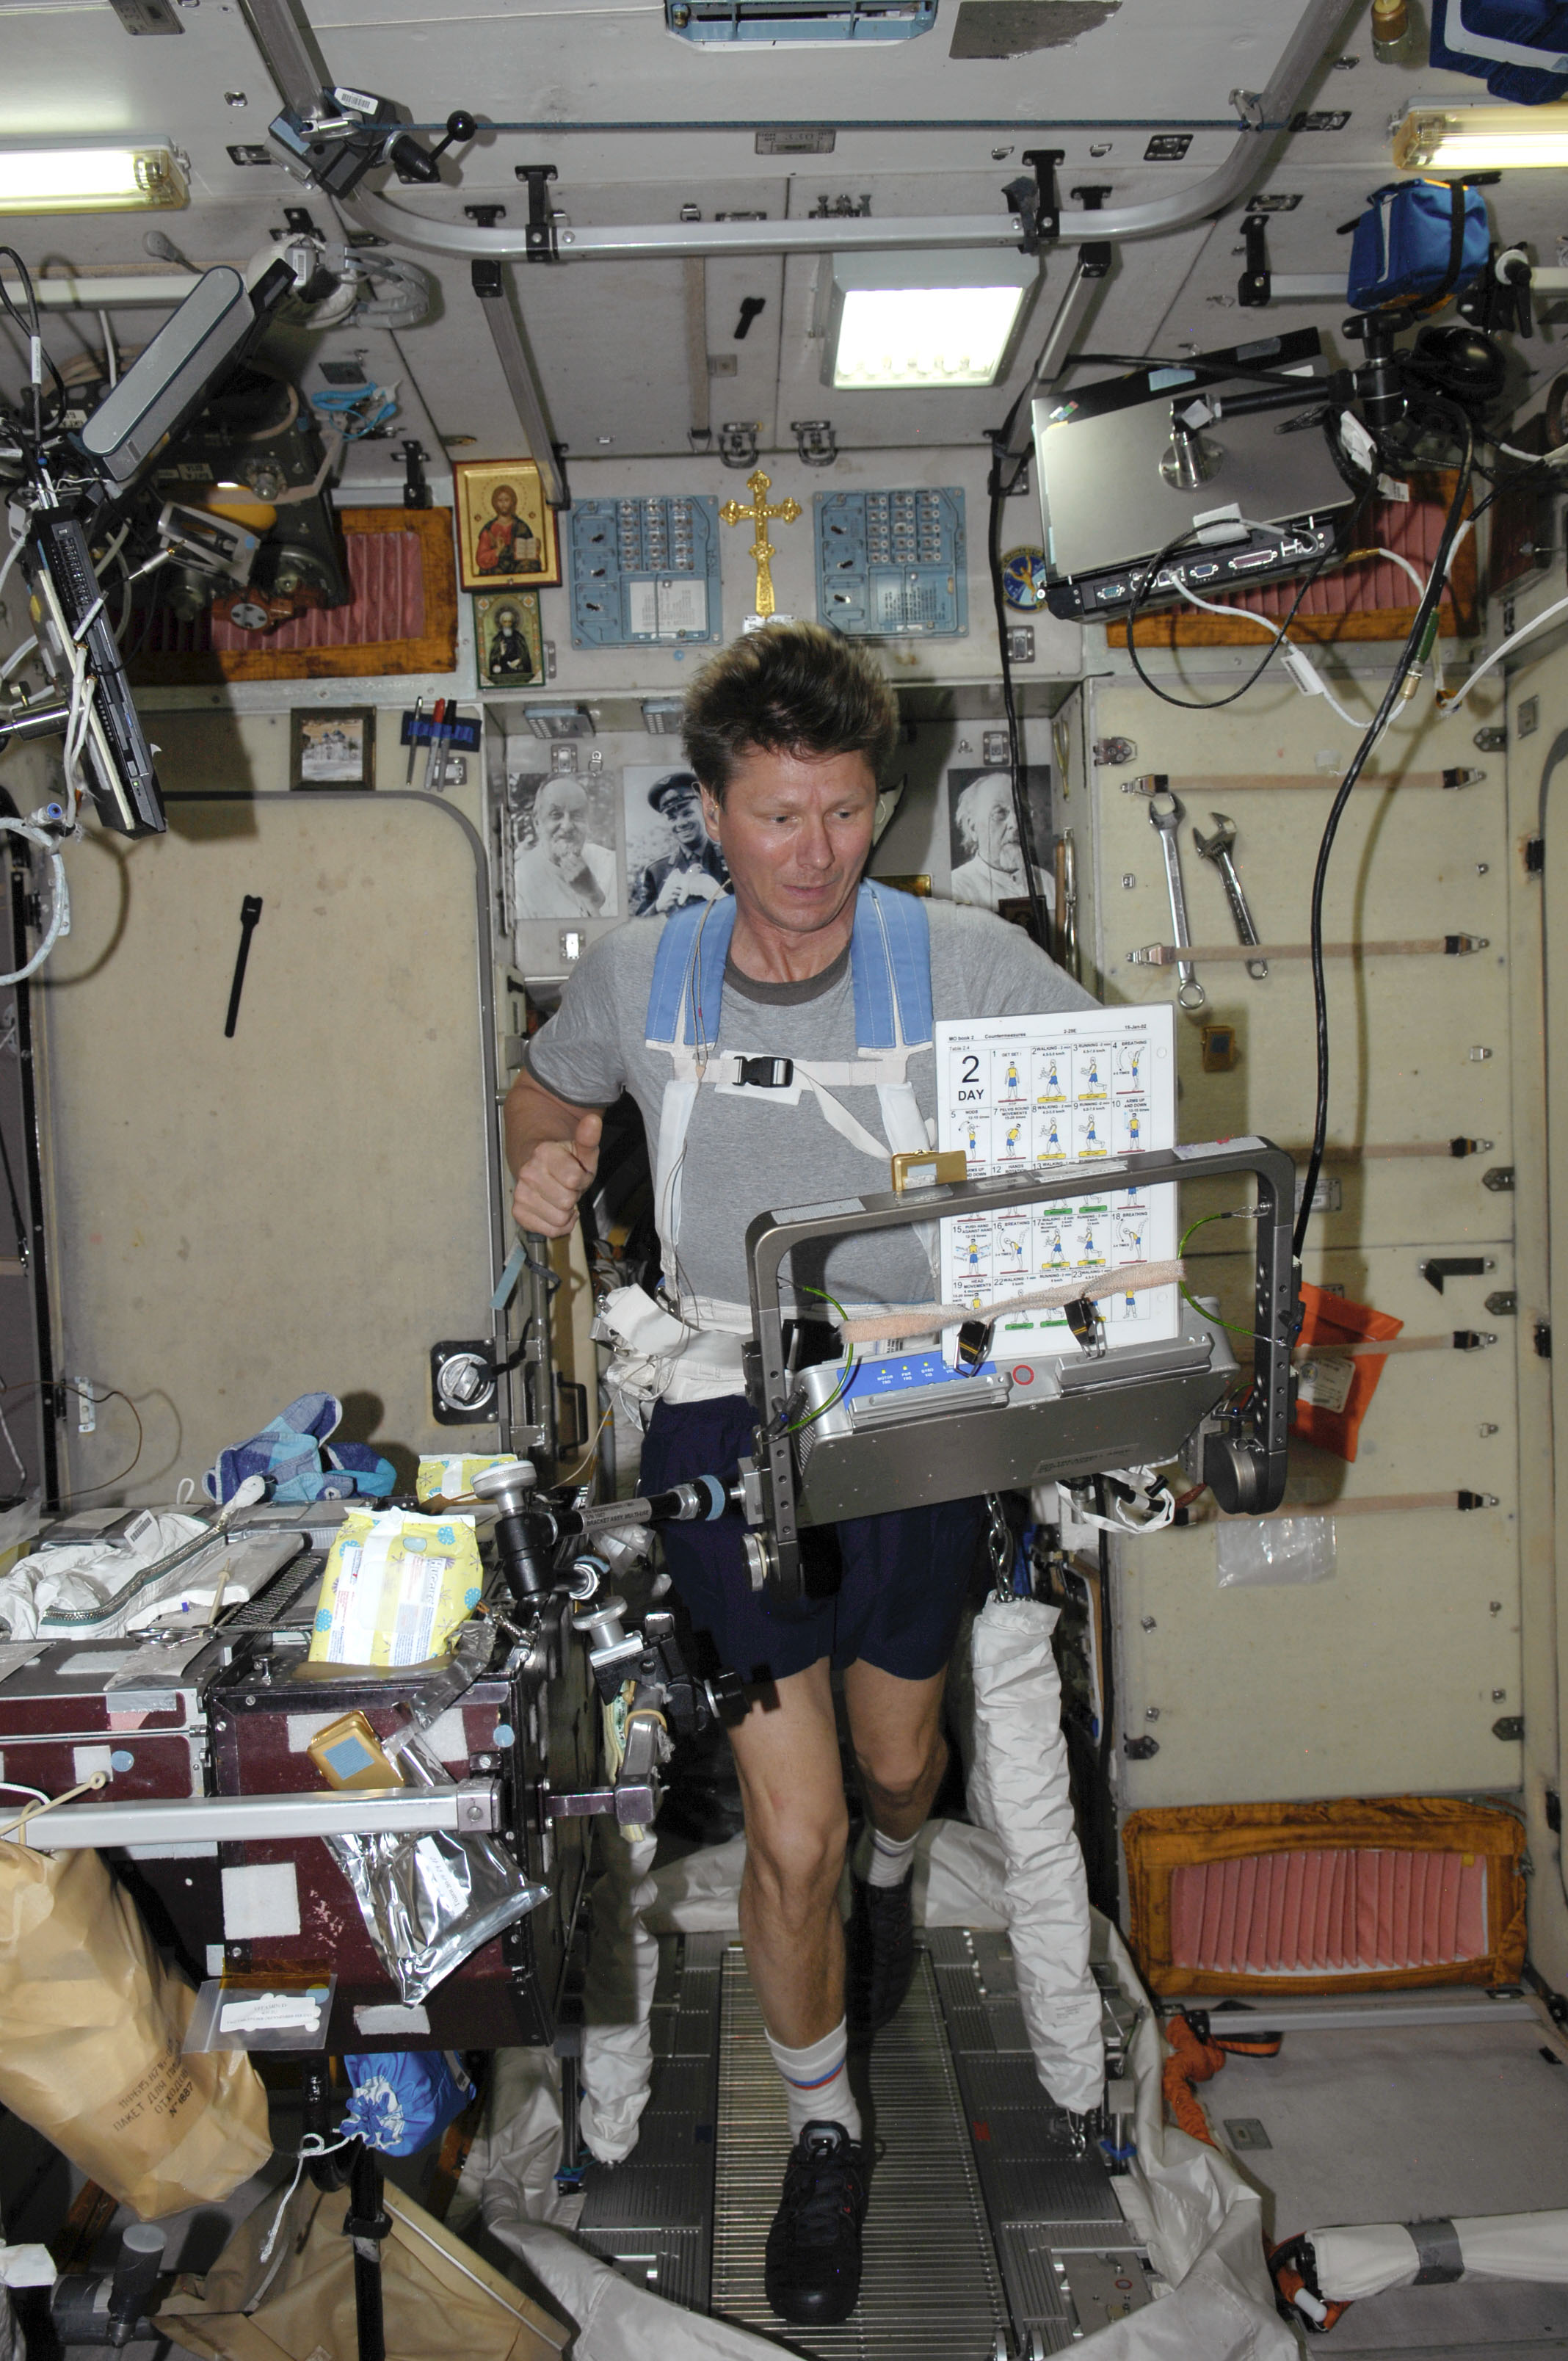 ISS-19 Gennady Padalka exercises on the TVIS in the Zvezda Service Module